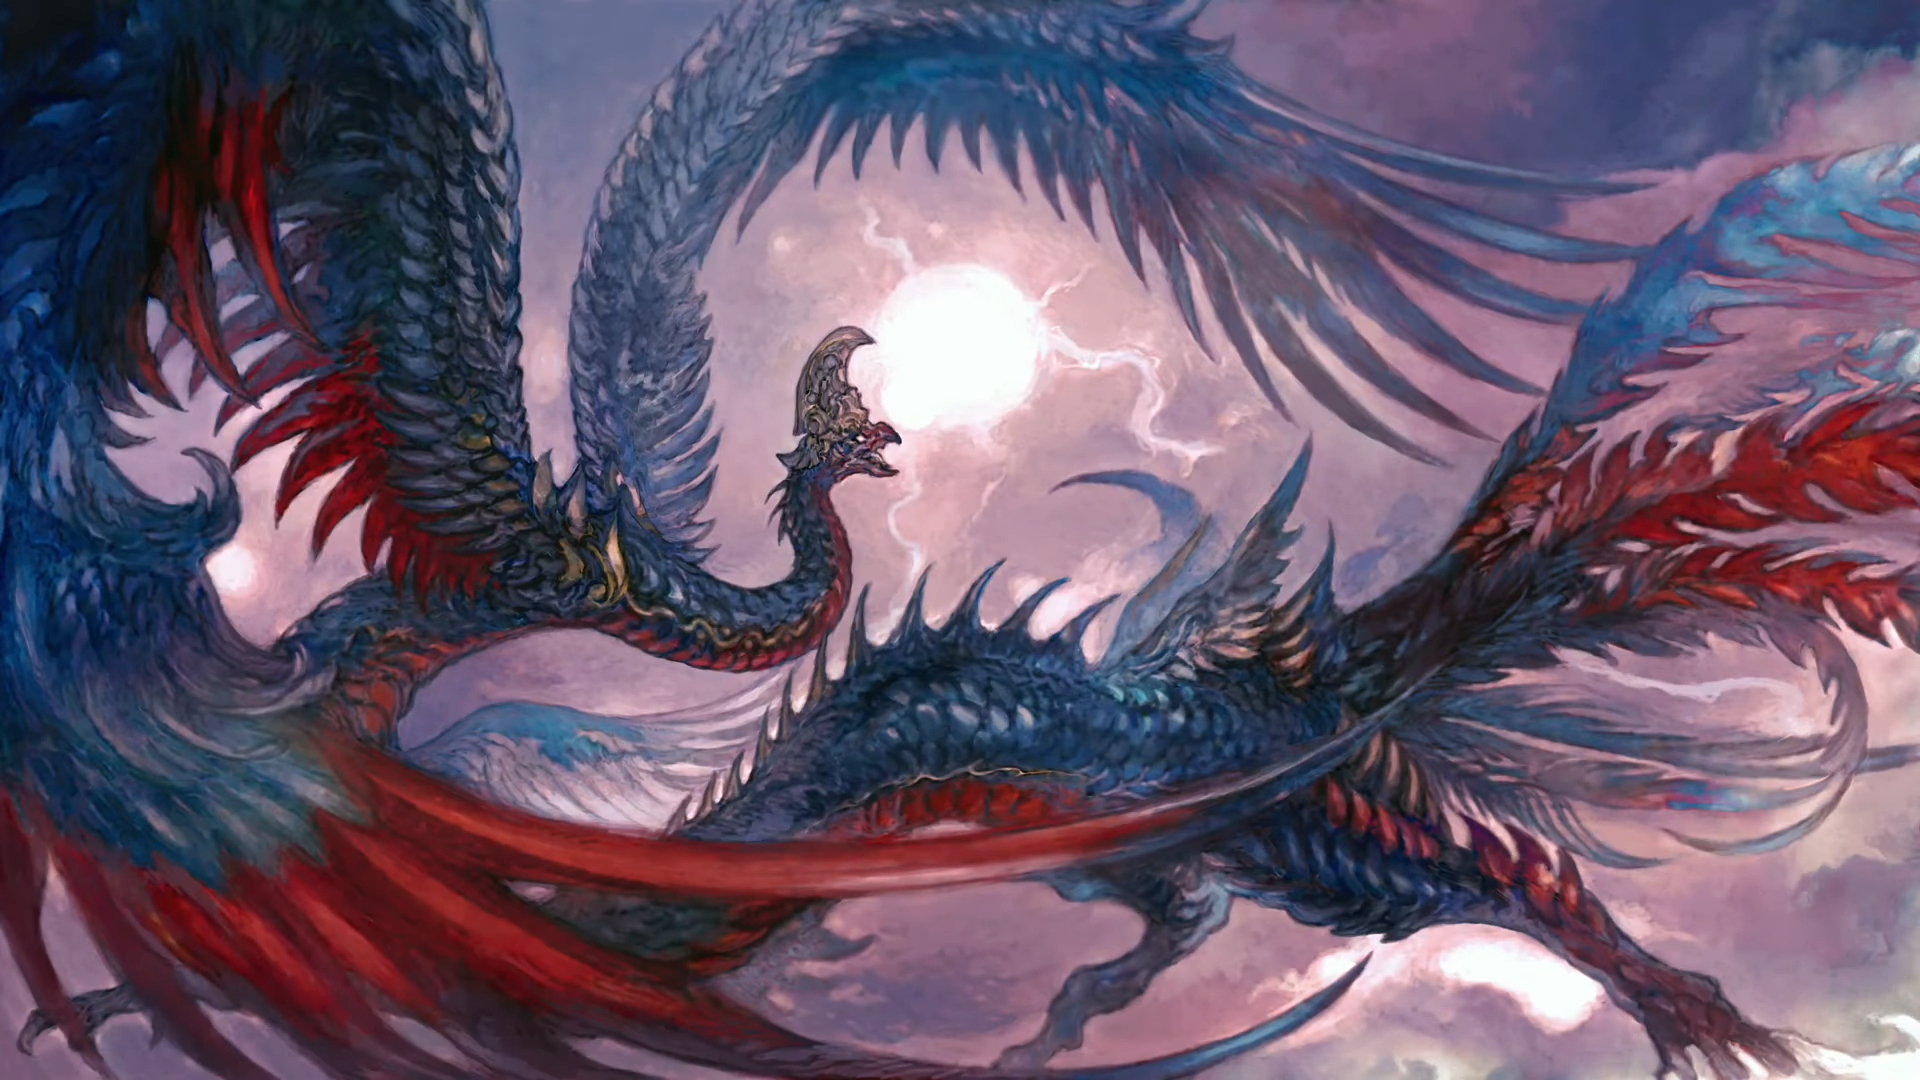 A blue and red dragon-like creature flies through a purple-gray sky